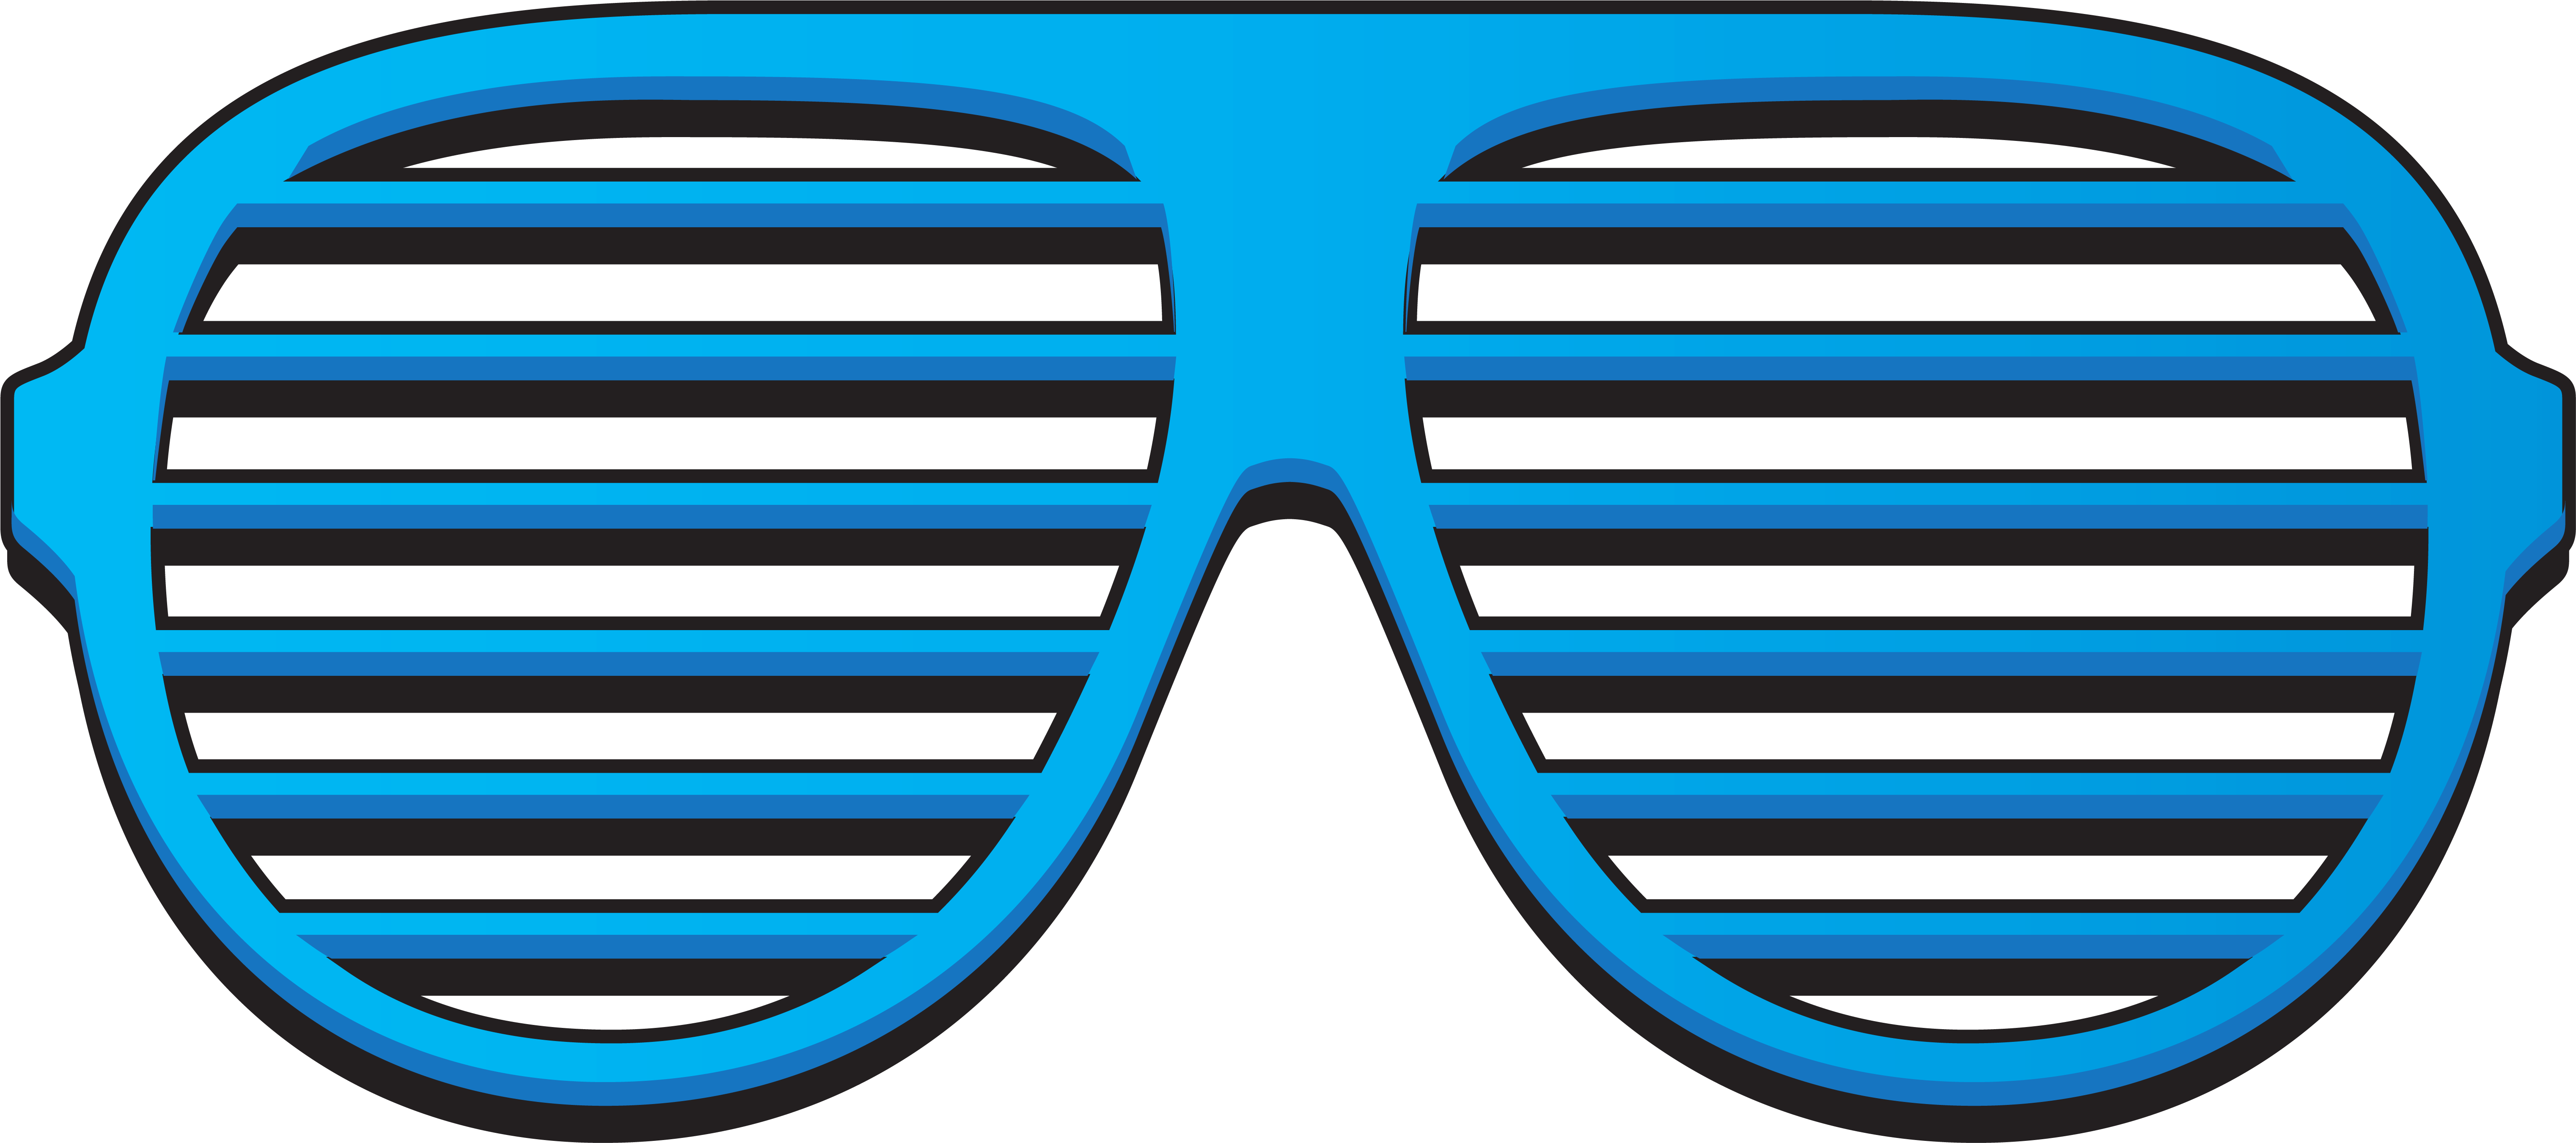 Clip Arts Related To - Shutter Sunglasses Png (6238x2766)